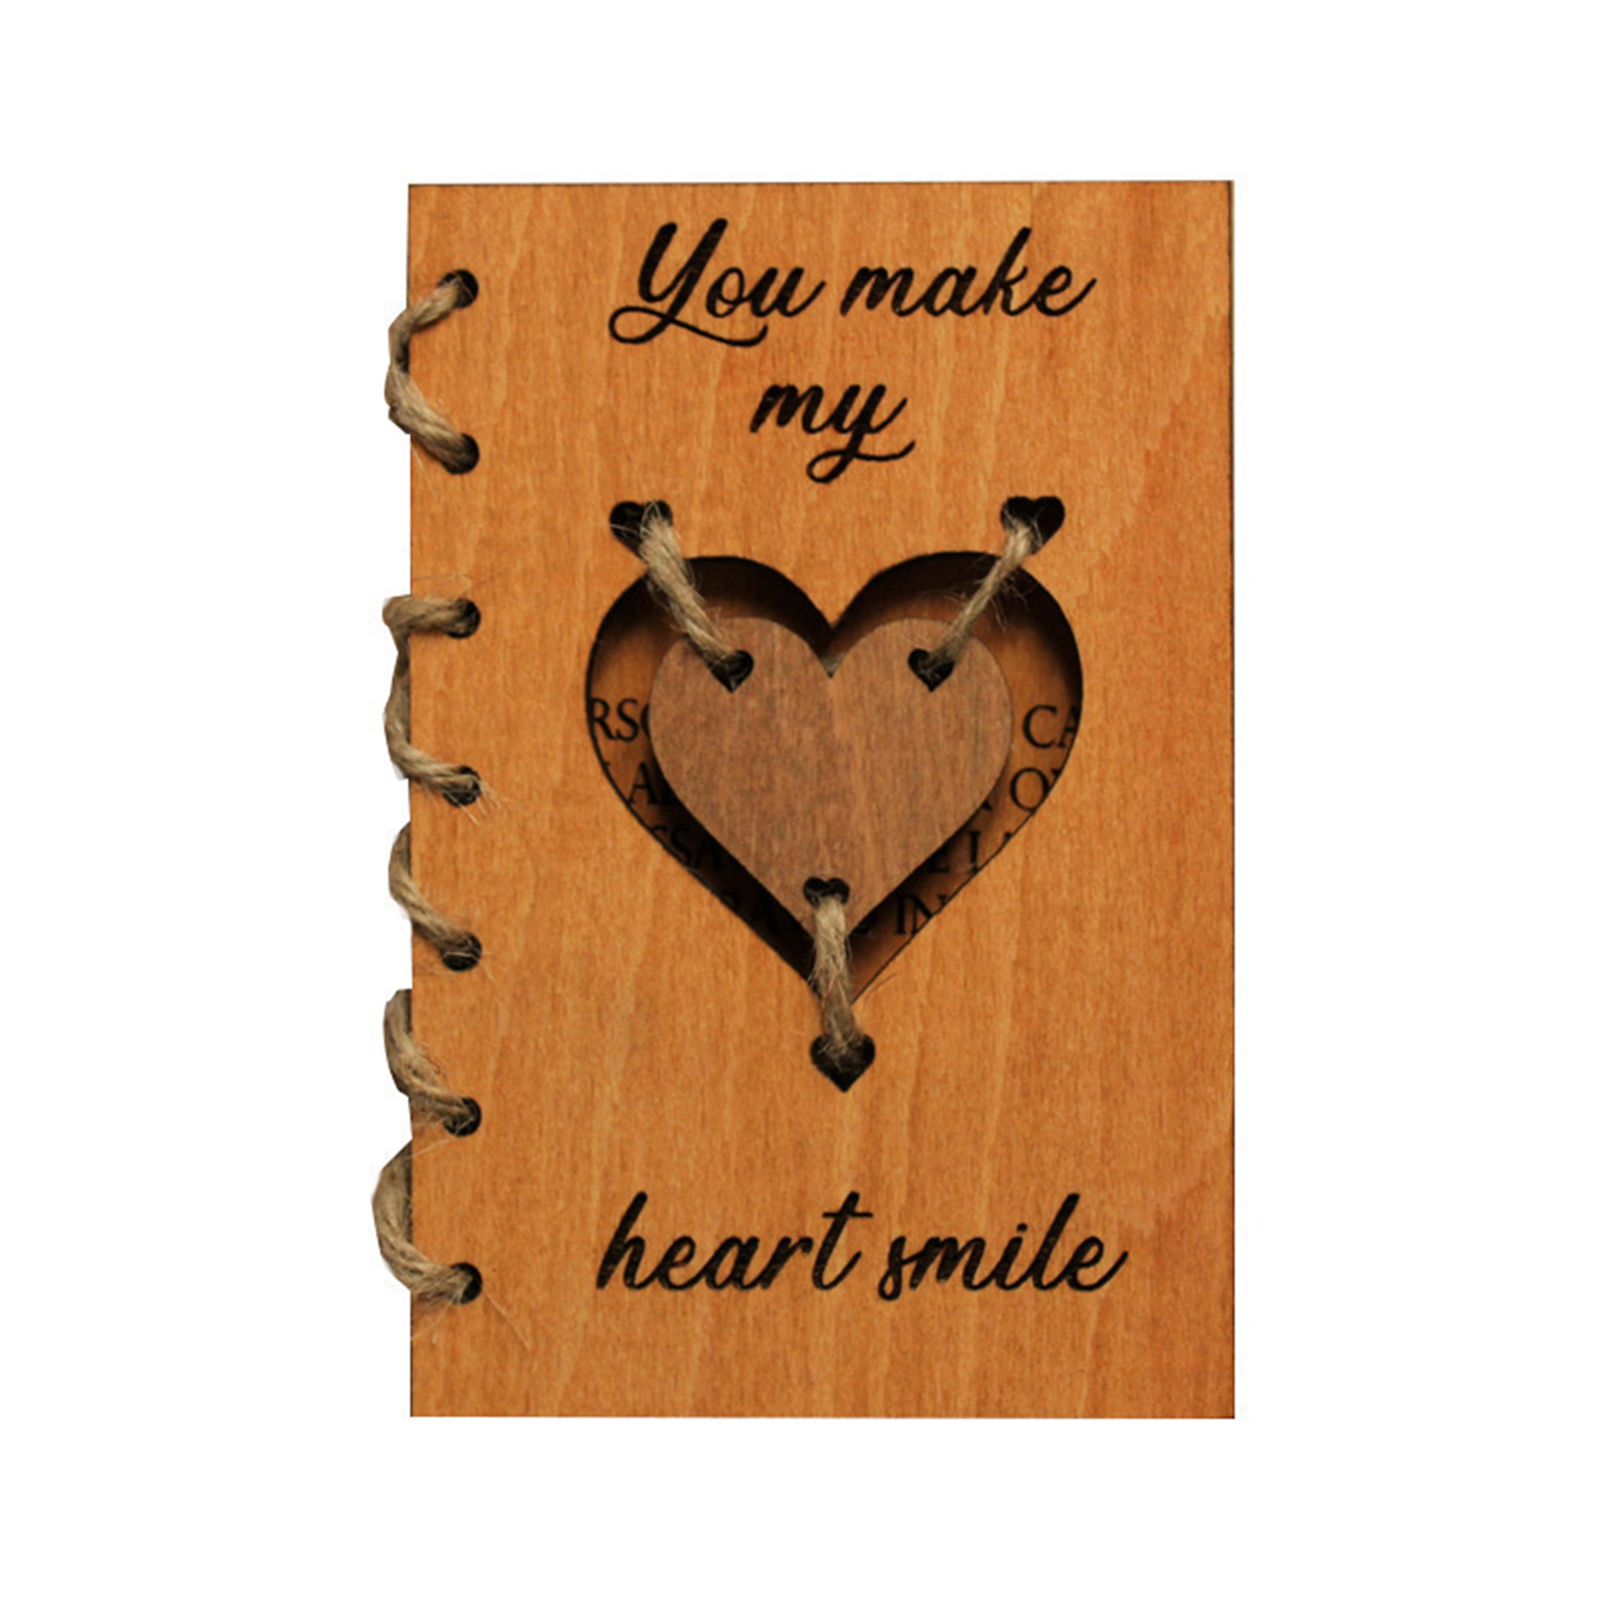 NYH Valentine Day Card Unique Valentine Day Card Romantic Wooden Love Card